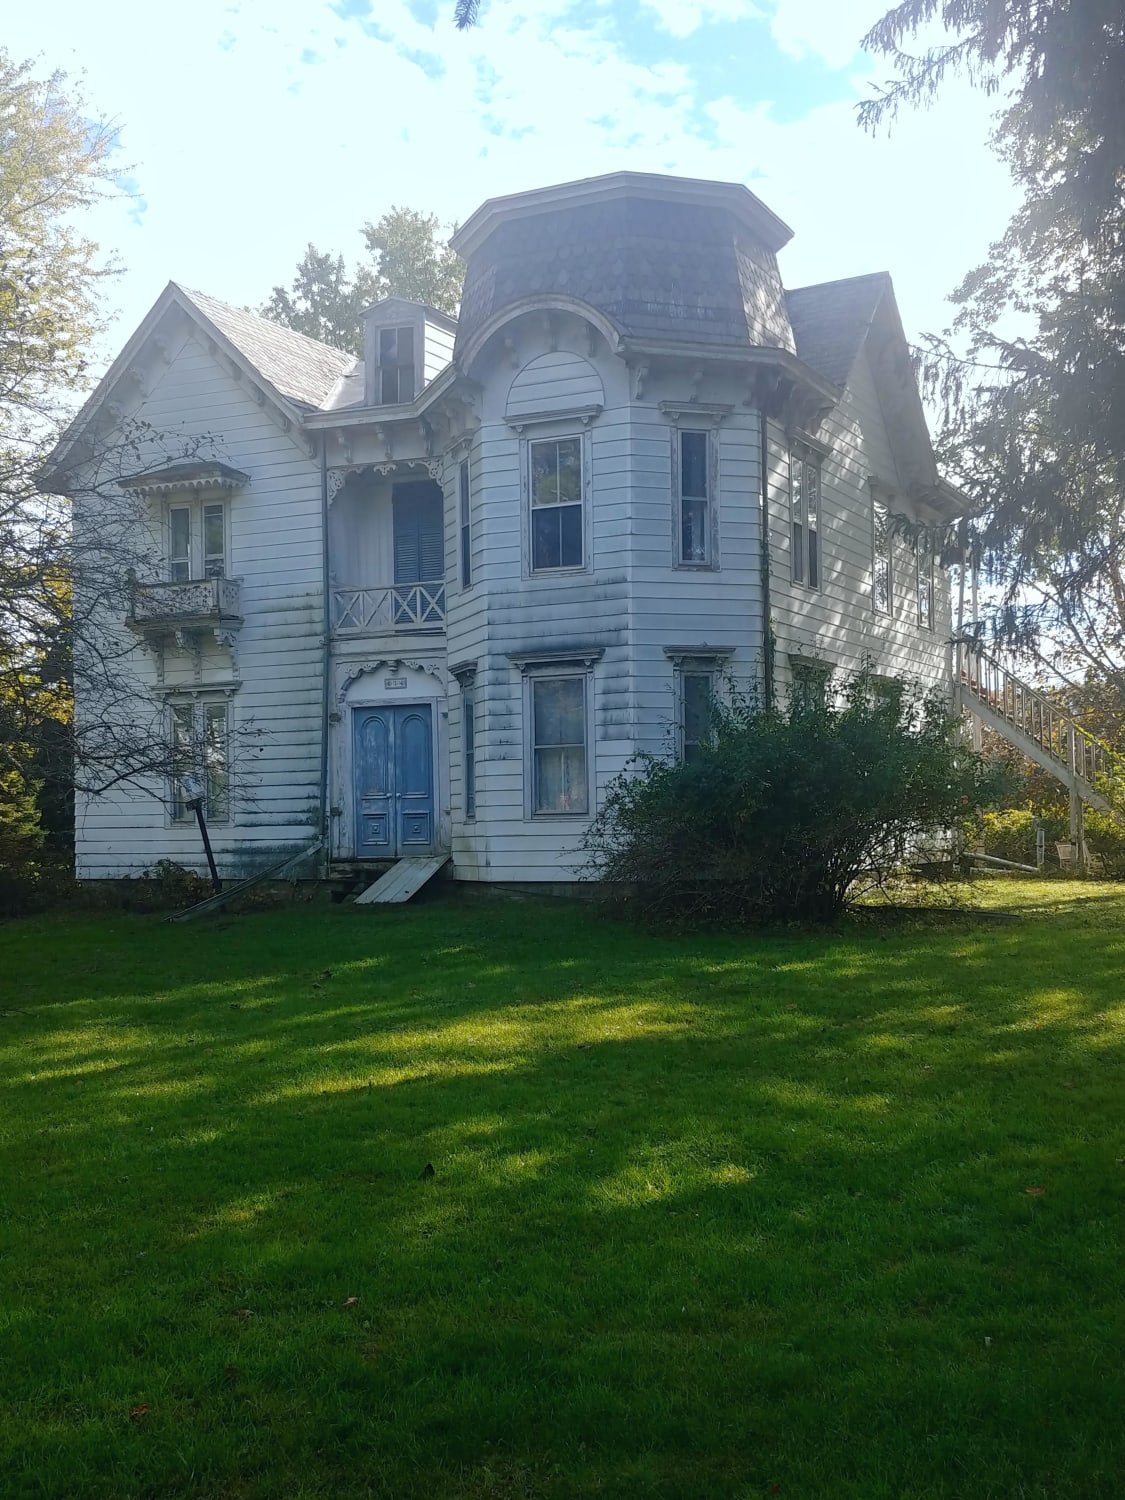 I know this sub loves creepy homes (as do I). This 1878 Victorian in upstate NY is most definitely (hopefully?) haunted. For sale, $350k.